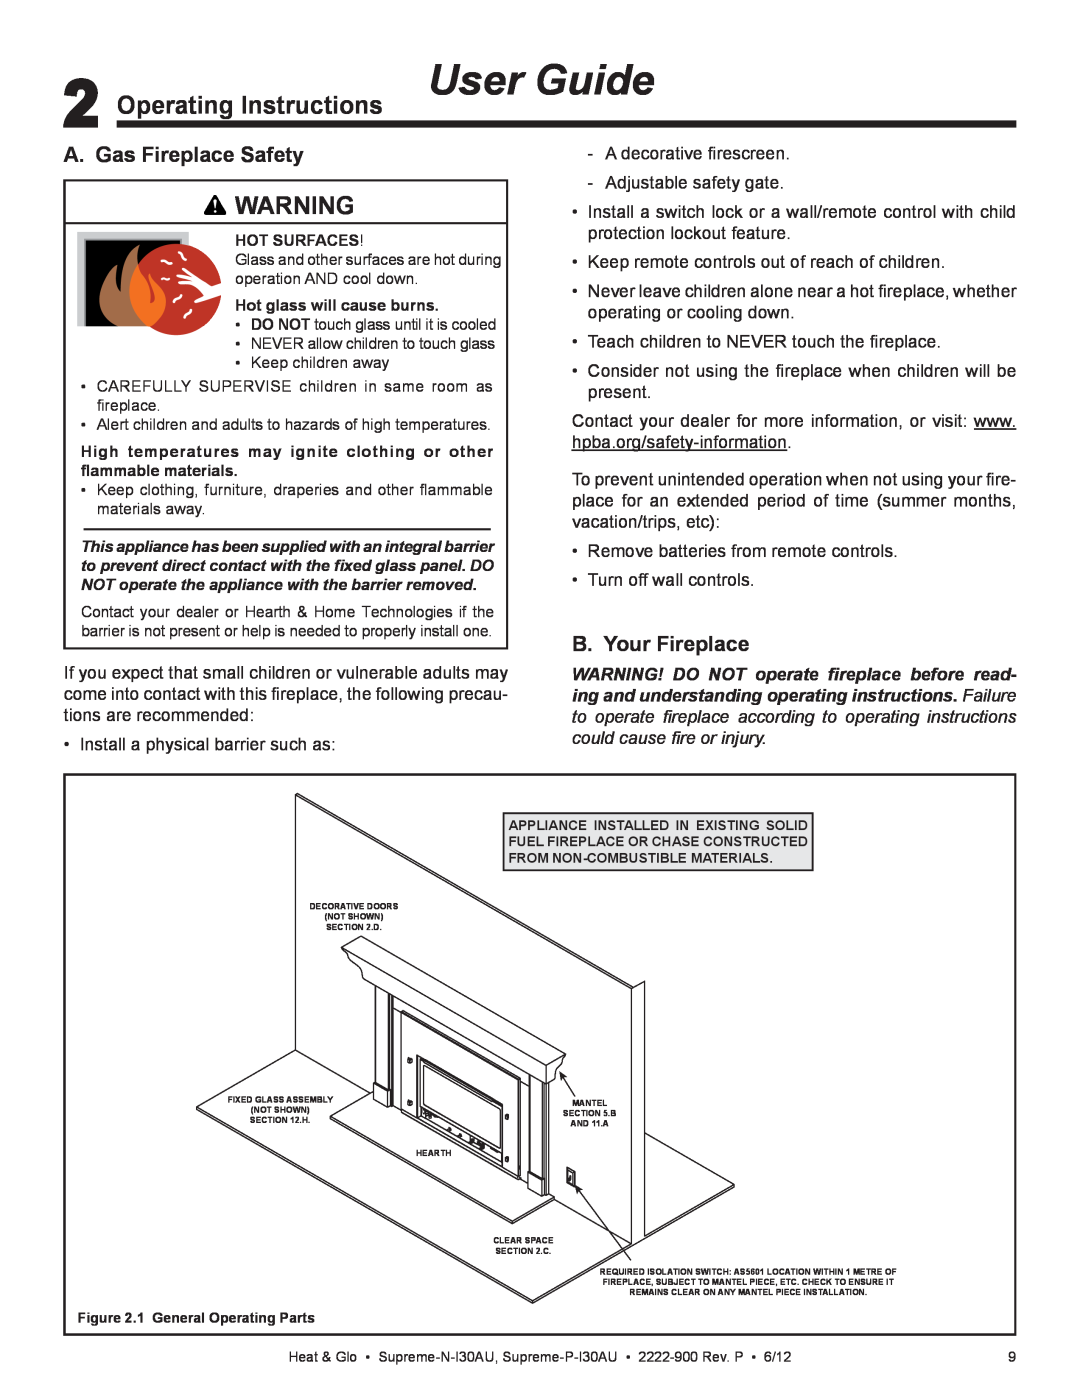 Heat & Glo LifeStyle SUPREME-N-I30AU Operating Instructions User Guide, A. Gas Fireplace Safety, B. Your Fireplace 